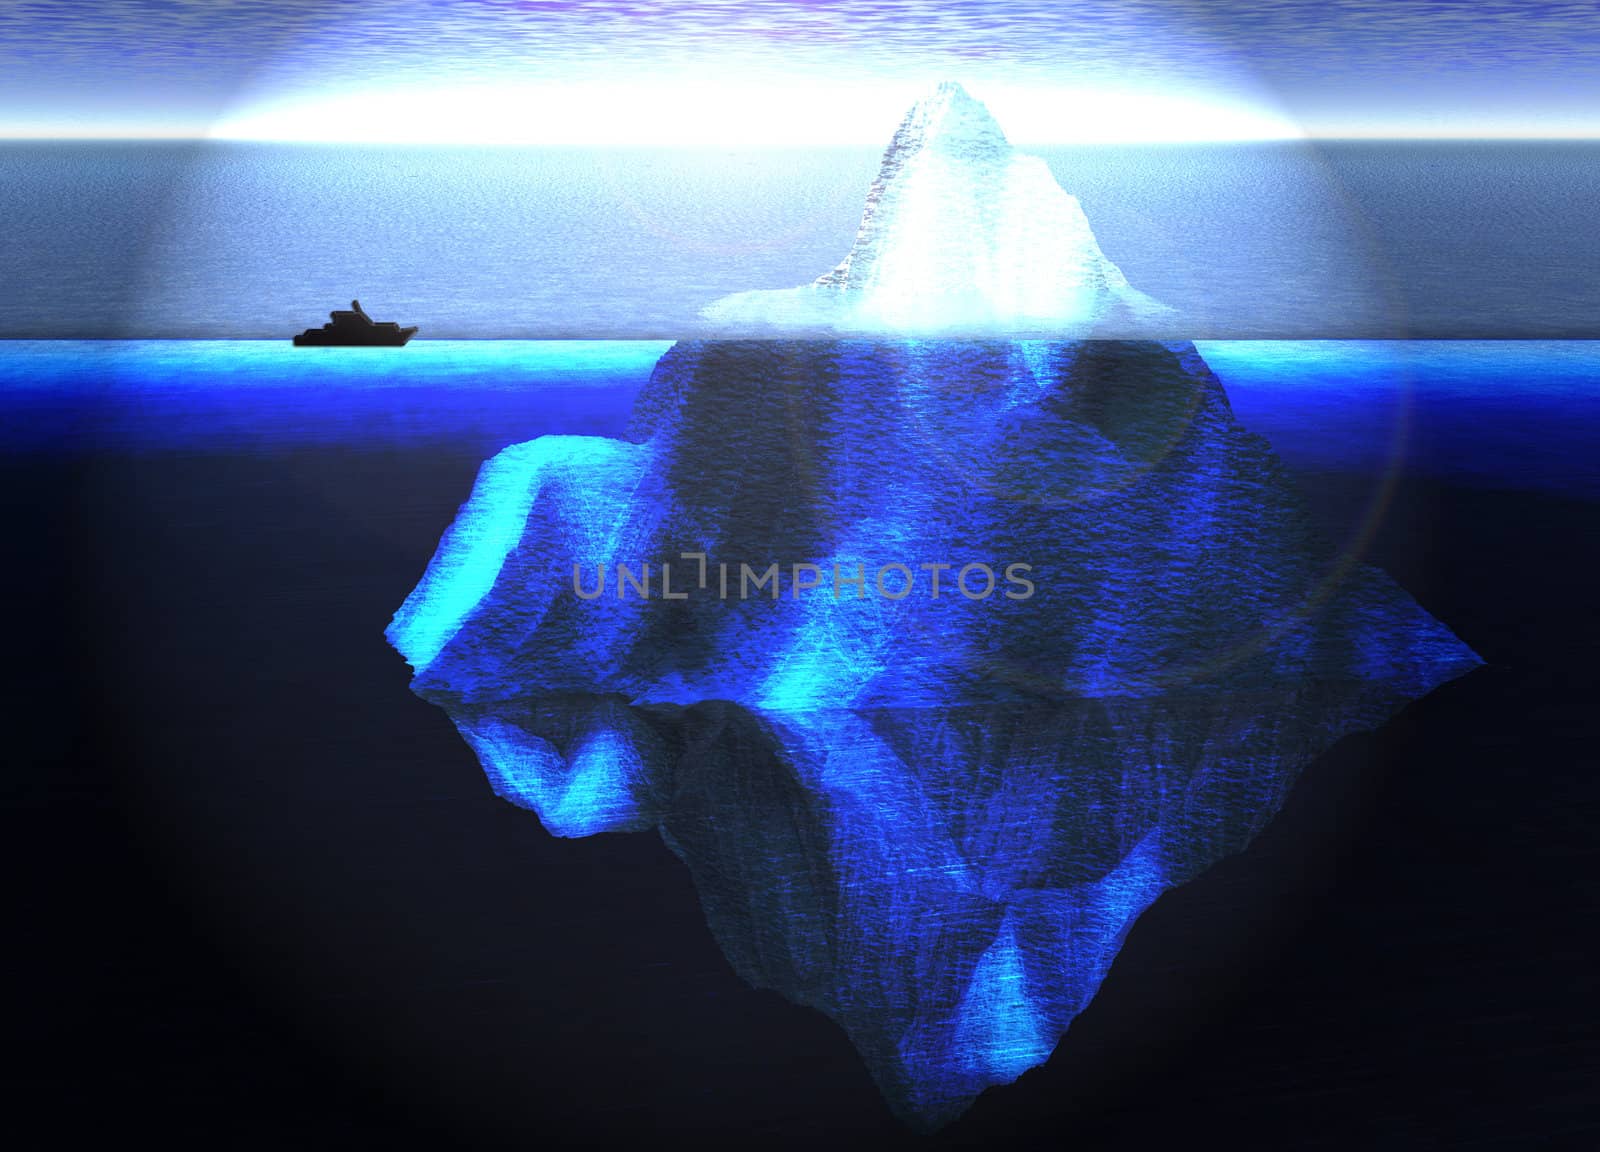 Floating Iceberg in the Open Ocean with Small Boat Nearby Illustration